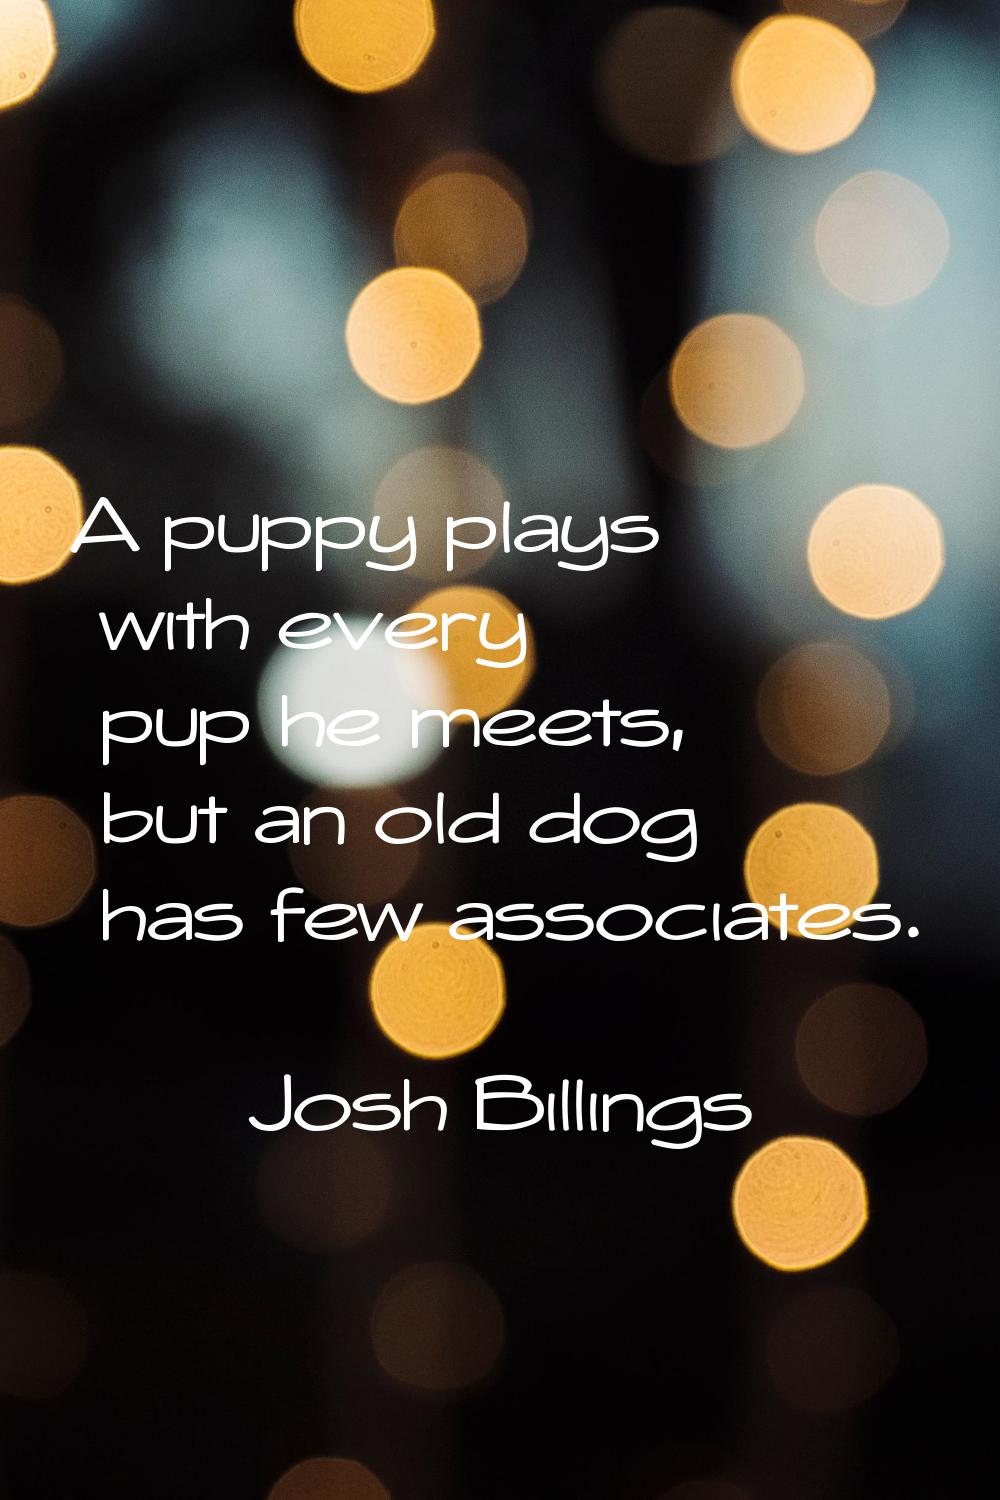 A puppy plays with every pup he meets, but an old dog has few associates.